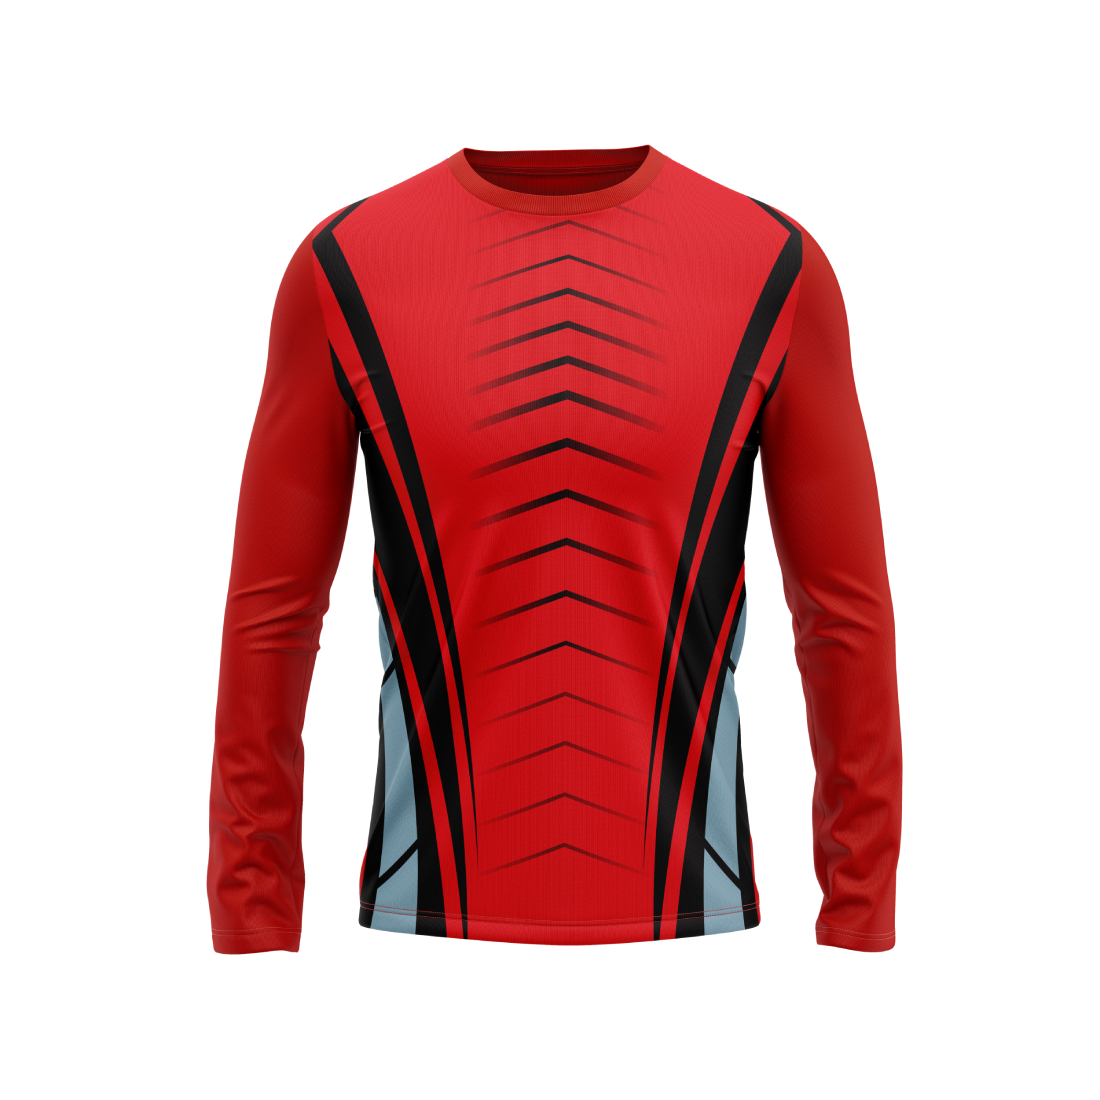 Round Neck Fullsleeve Printed Jersey Red NP00142